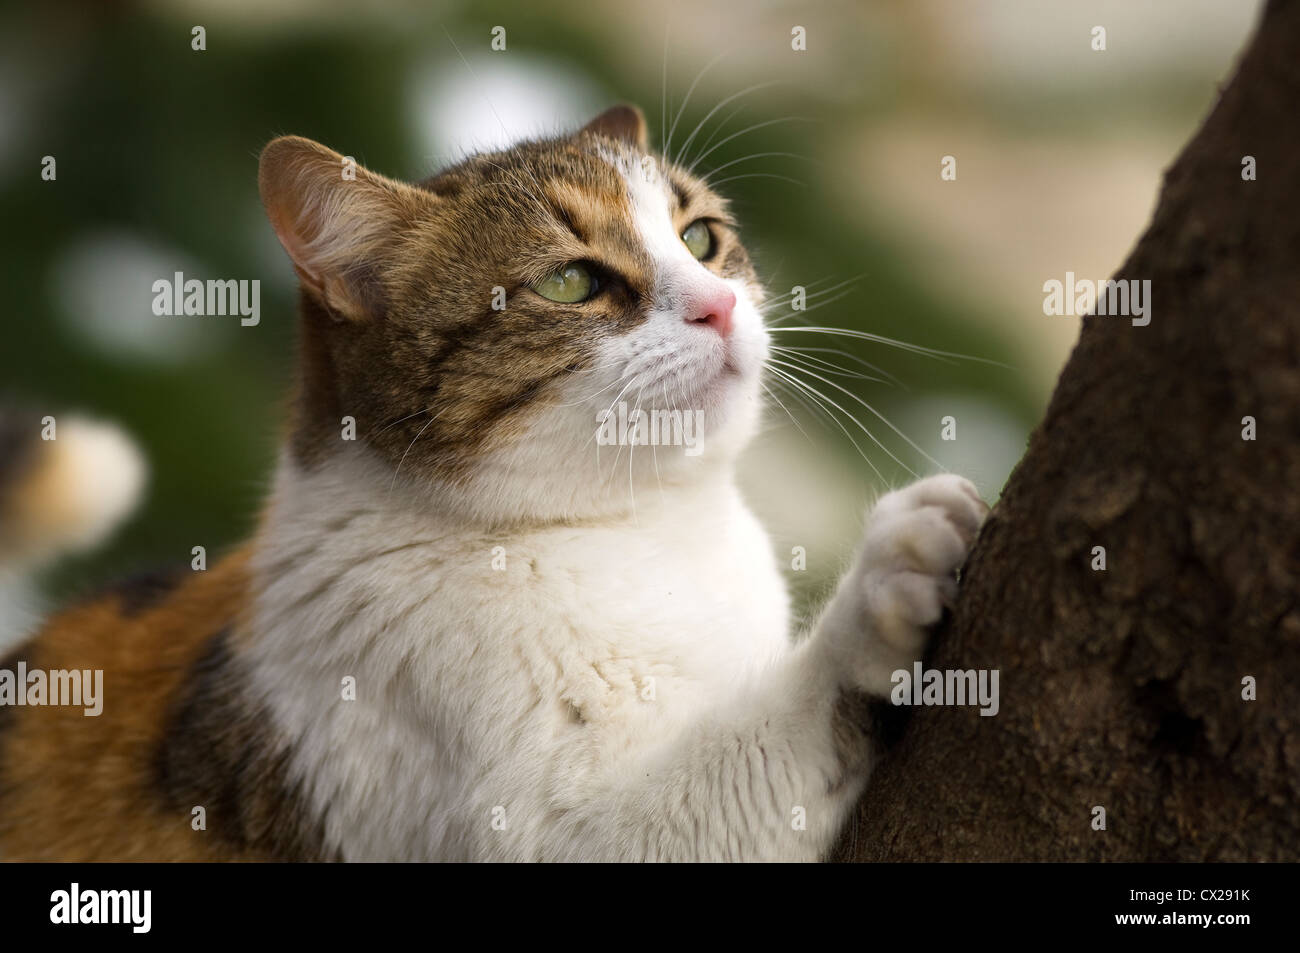 Tortoiseshell cat sharpening its claws on a tree Stock Photo